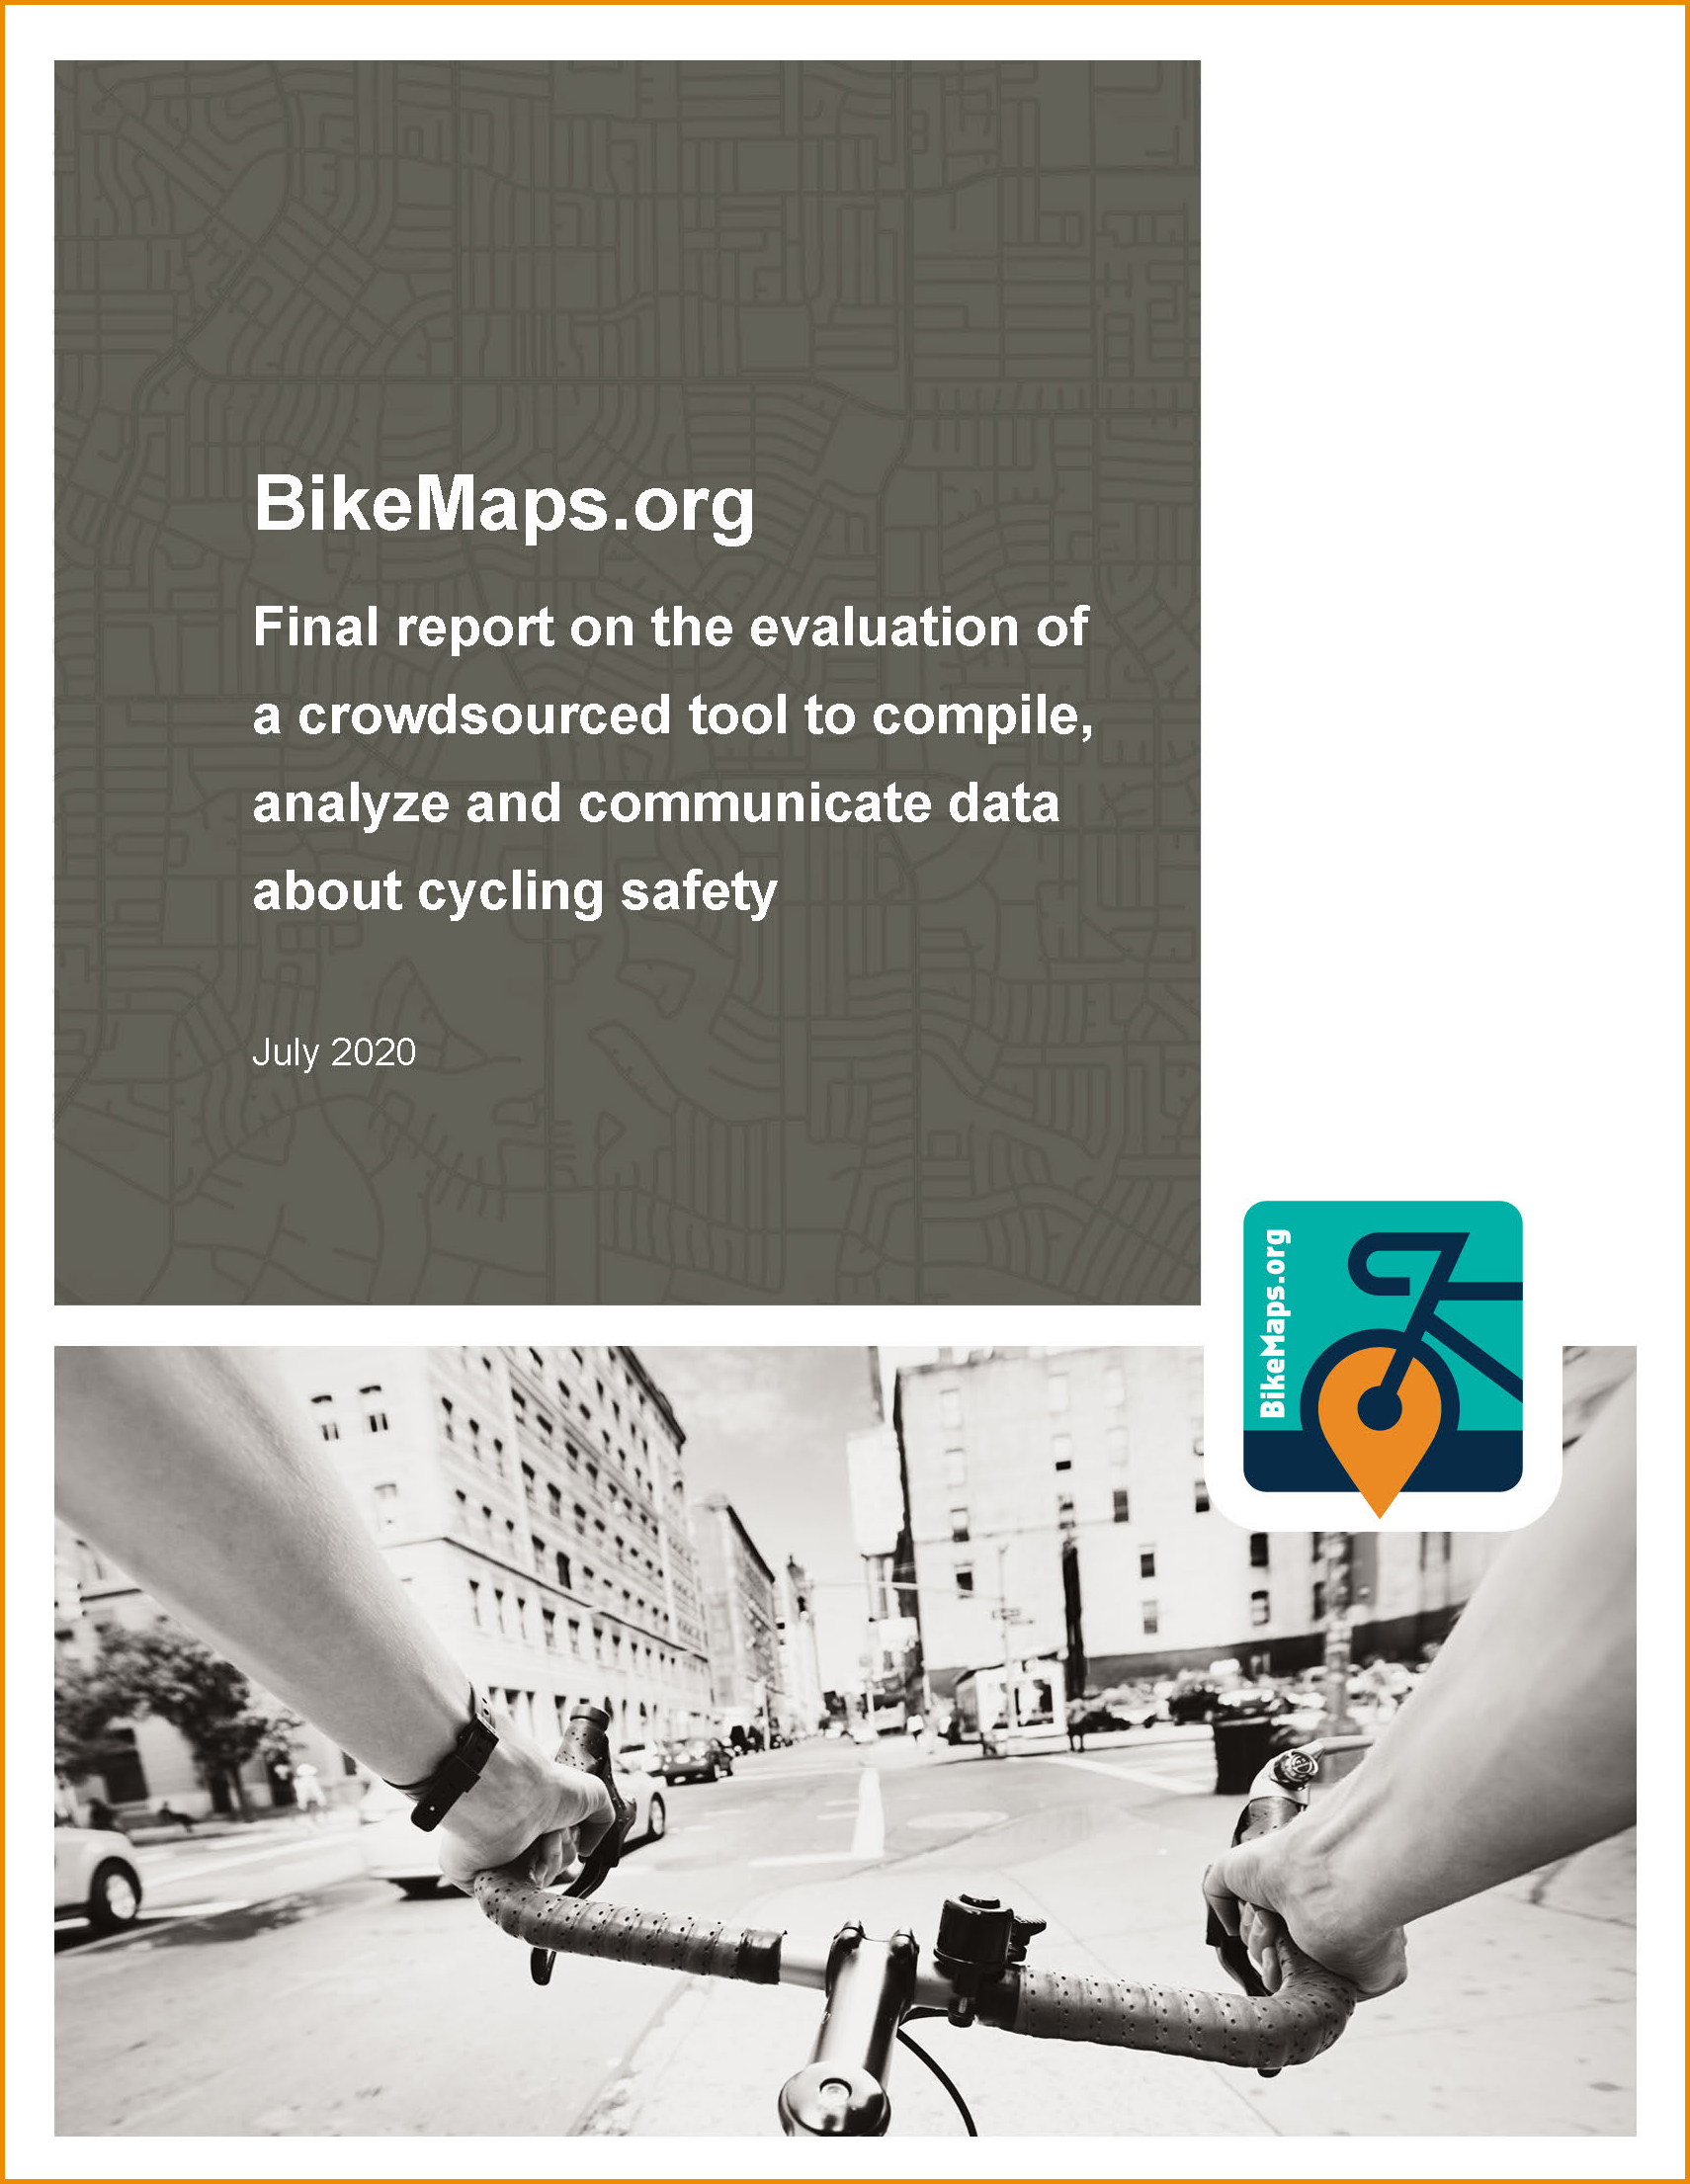 BikeMaps.org - Final report on the evaluation of a crowdsourced tool to compile, analyze and communicate data about cycling safety